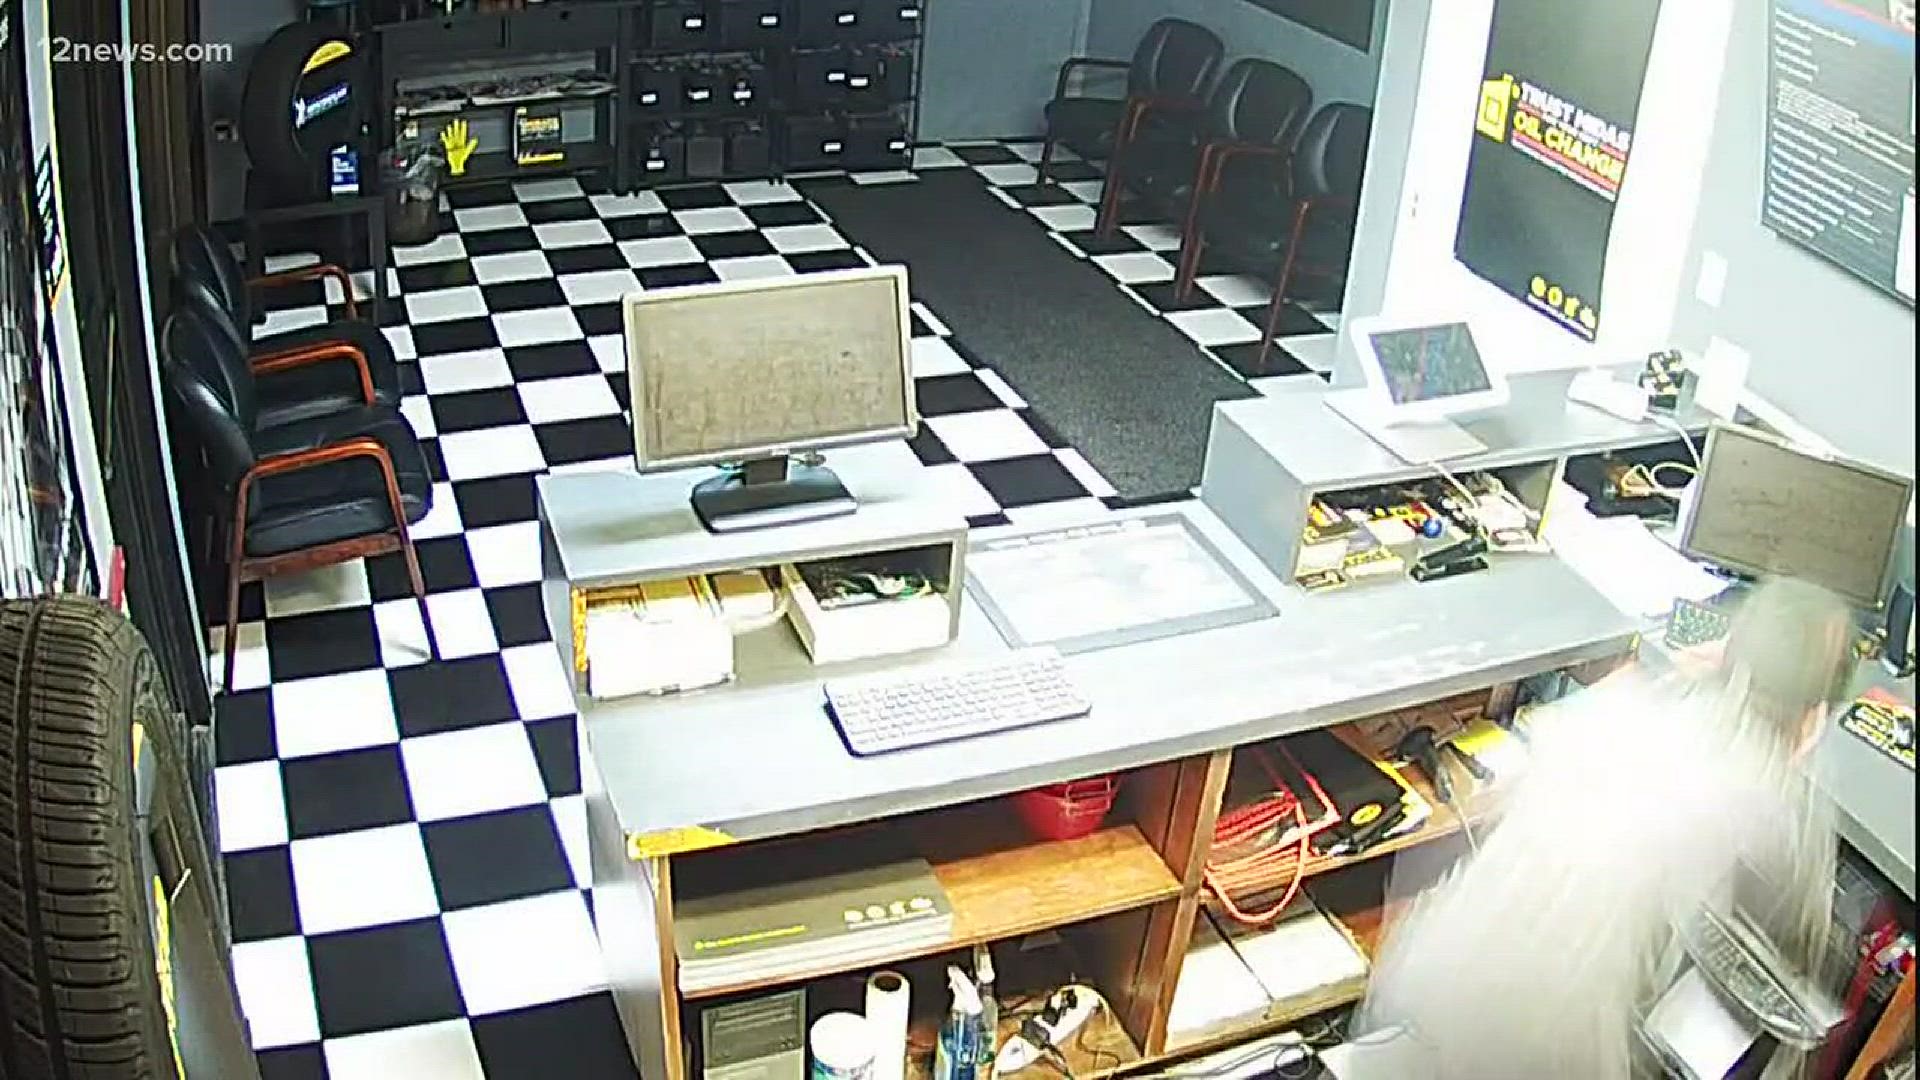 Scottsdale police need your help catching a pair of crooks caught on camera robbing a Midas auto repair shop.